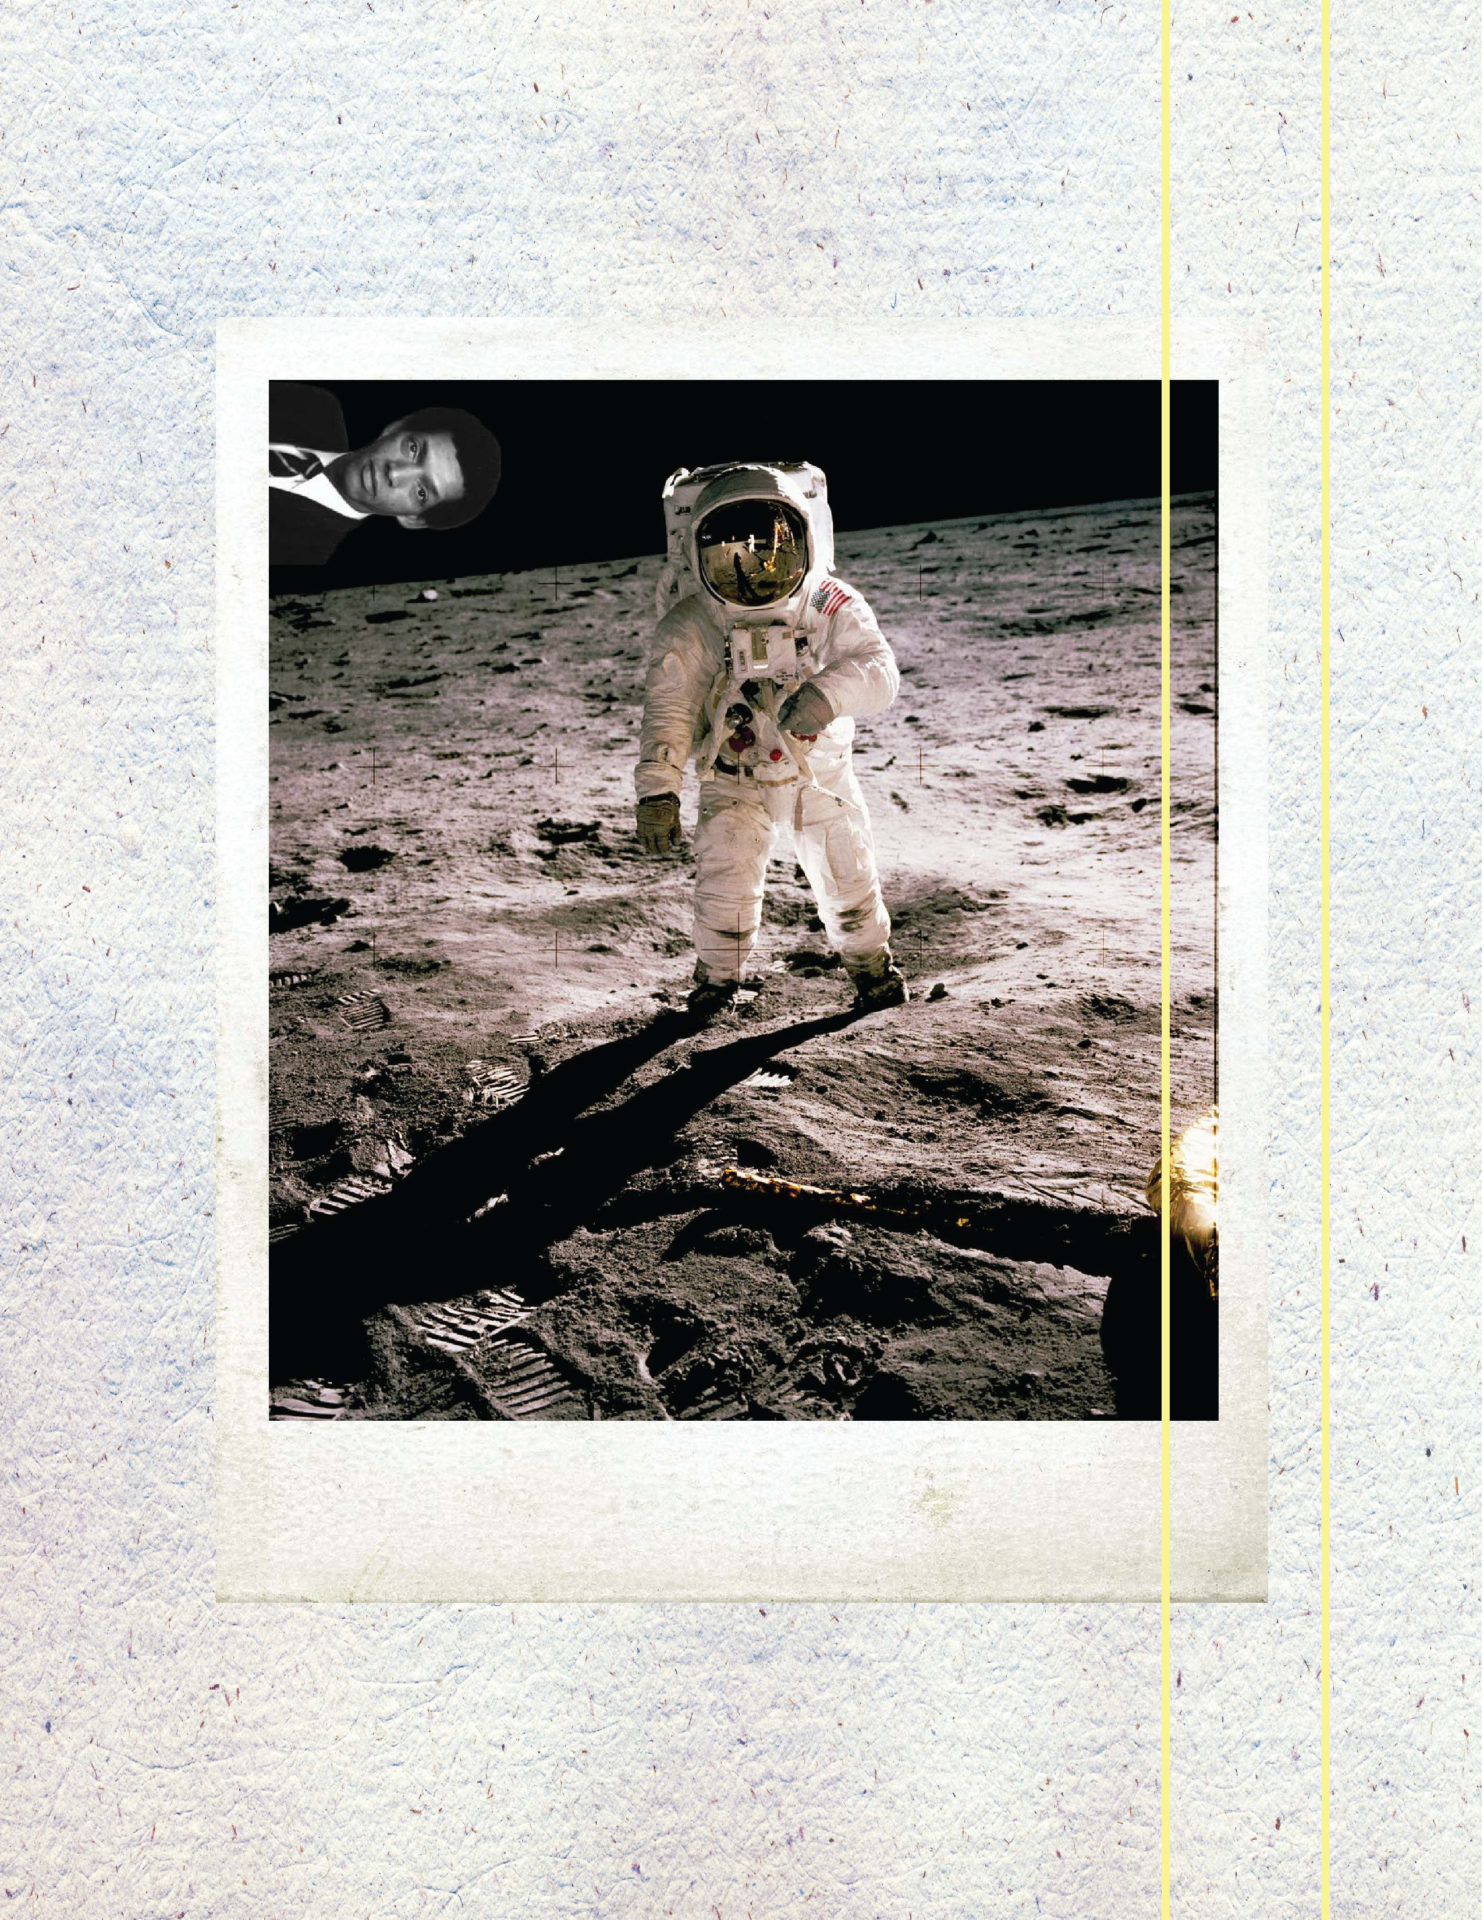 An image of George Carruthers, the scientist who invented the photographic process that captured images of the moon's surface, overlies a photograph from the moon landing. Press image courtesy of the artist